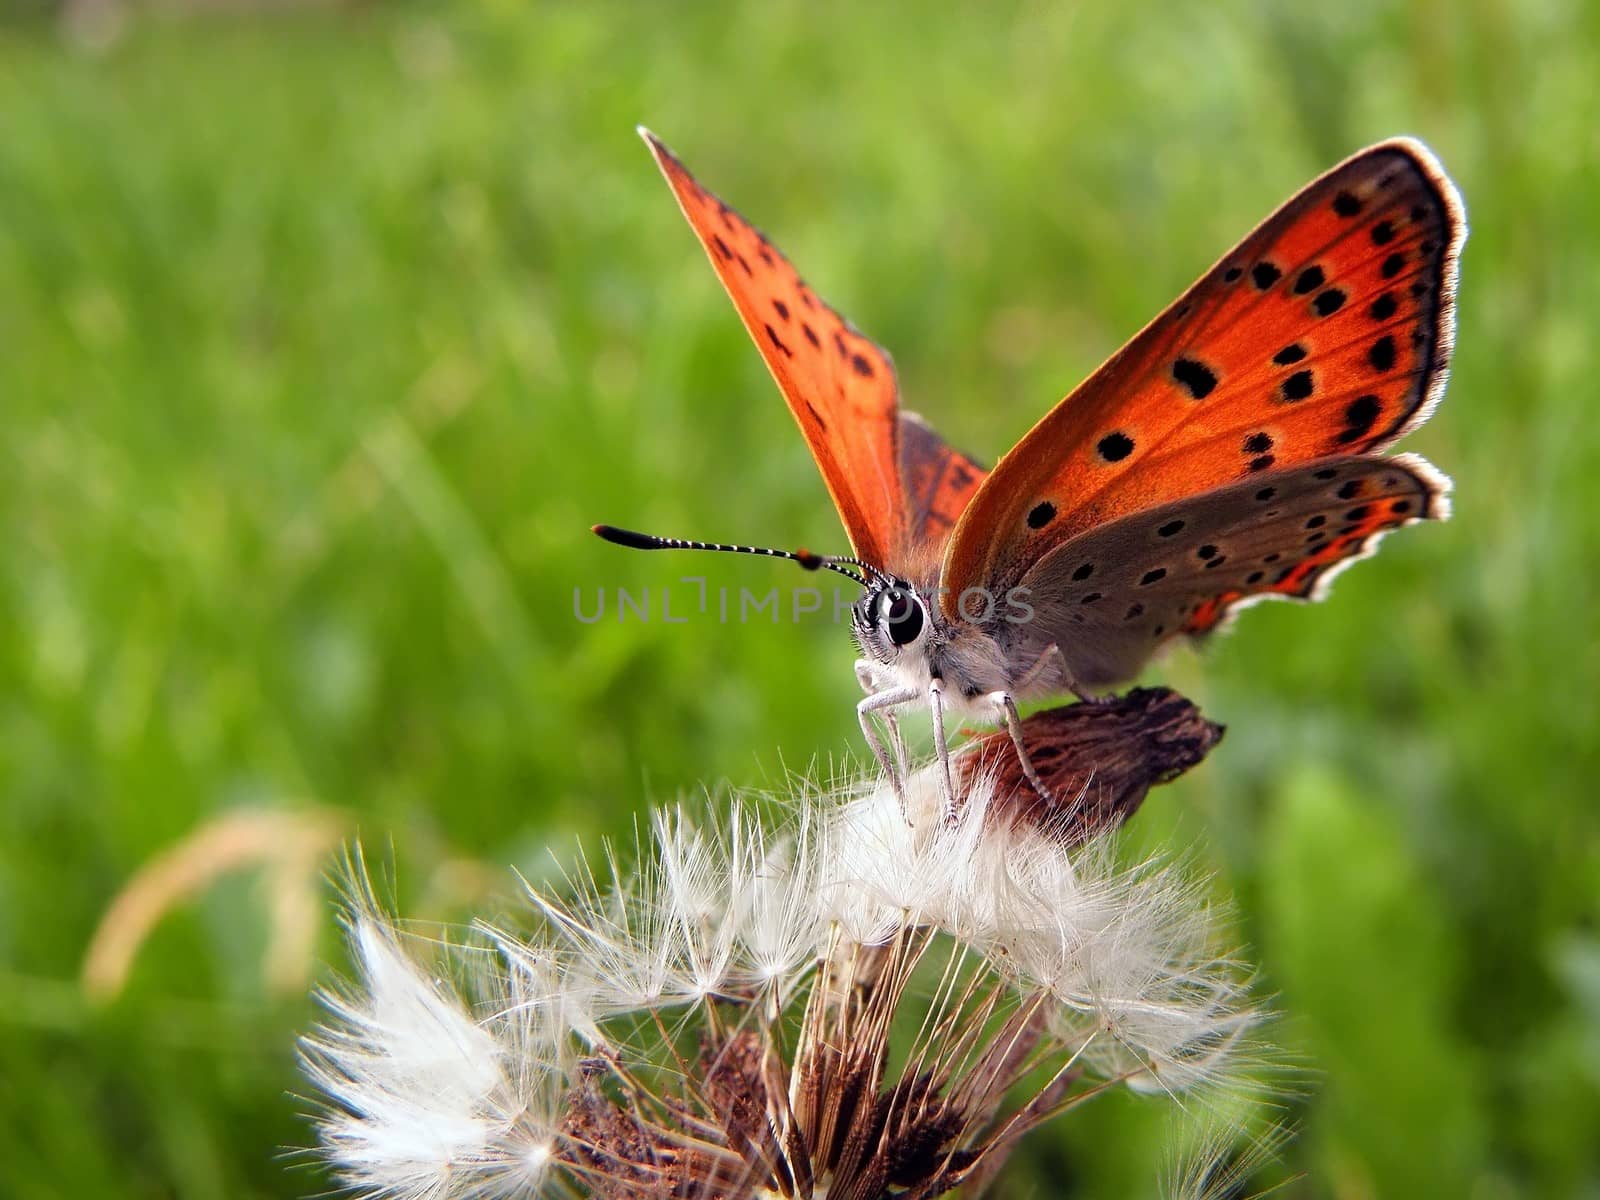 Butterfly on a dandelion, looking for flowers yesterday.